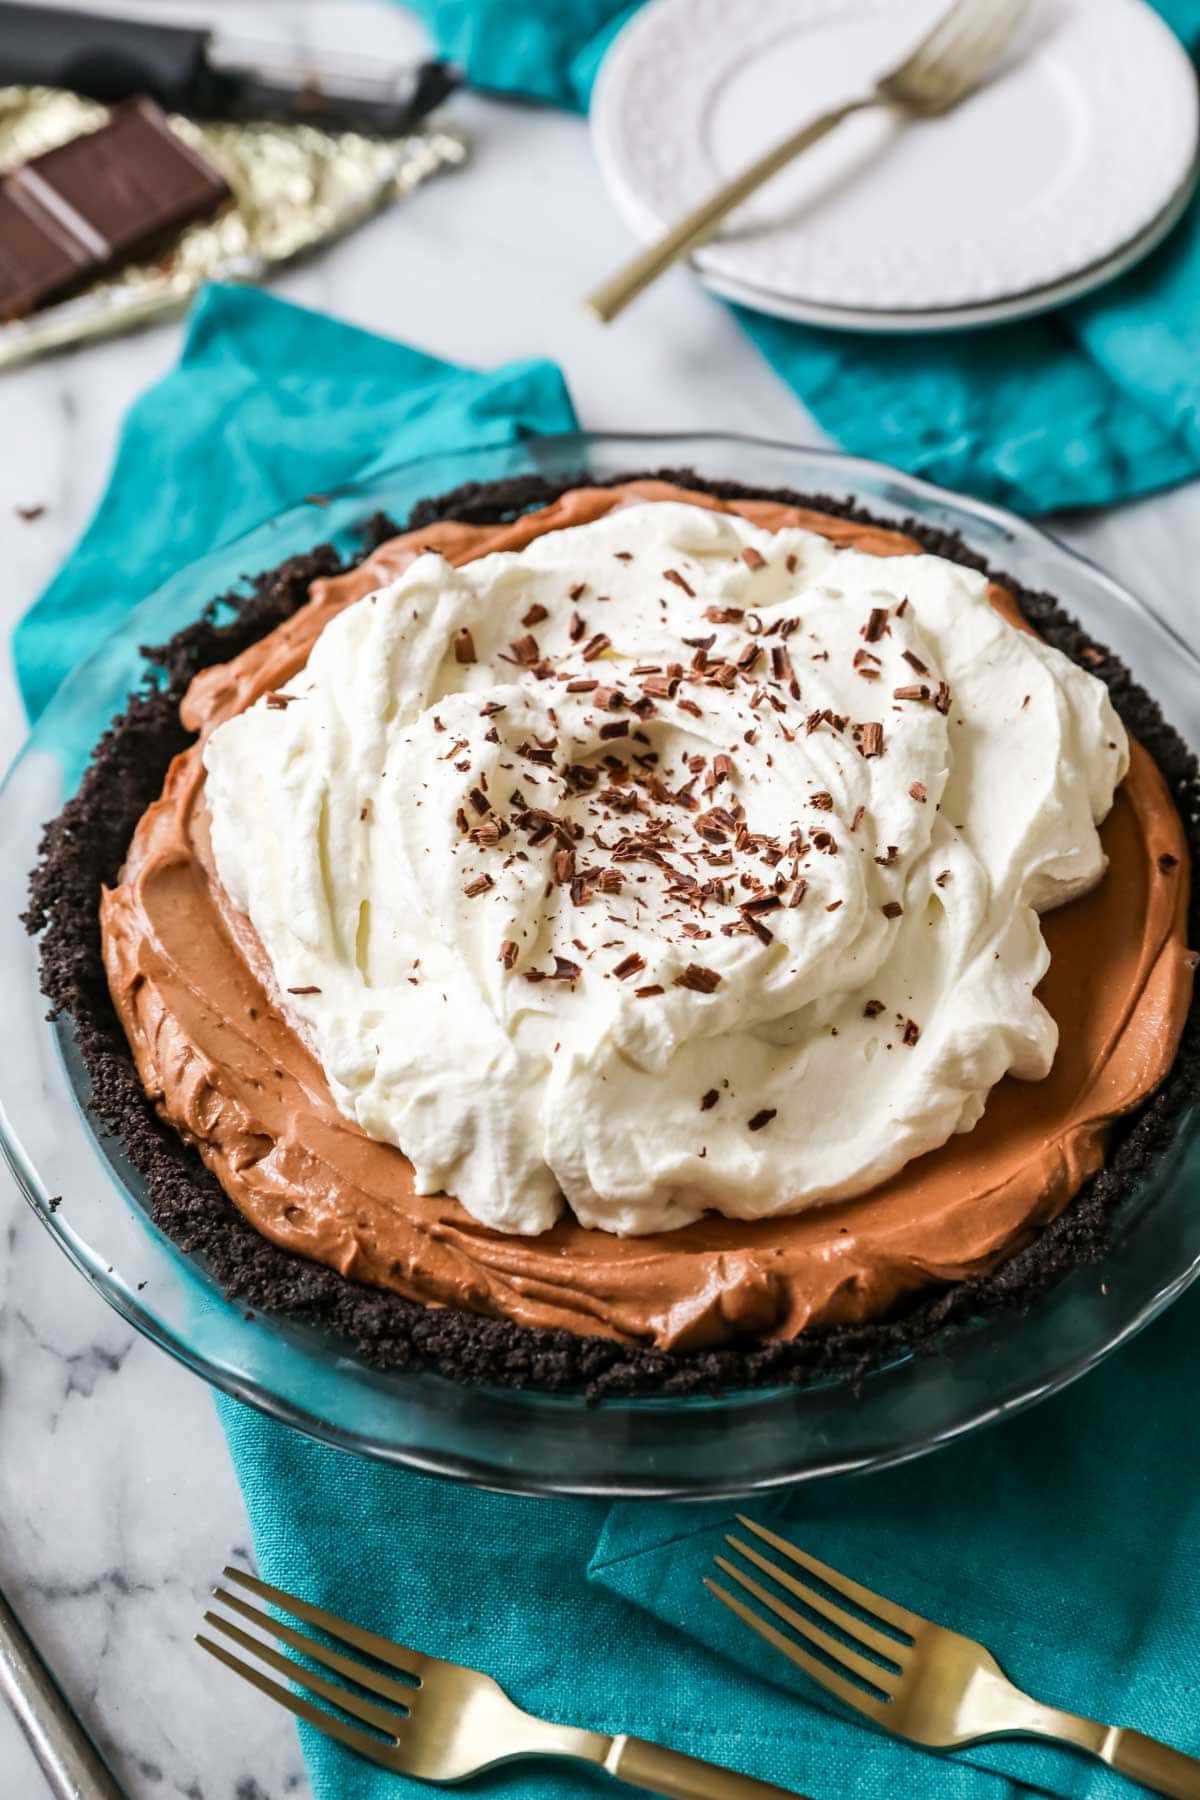 Mississippi mud pie topped with a thick layer of whipped cream and chocolate shavings.